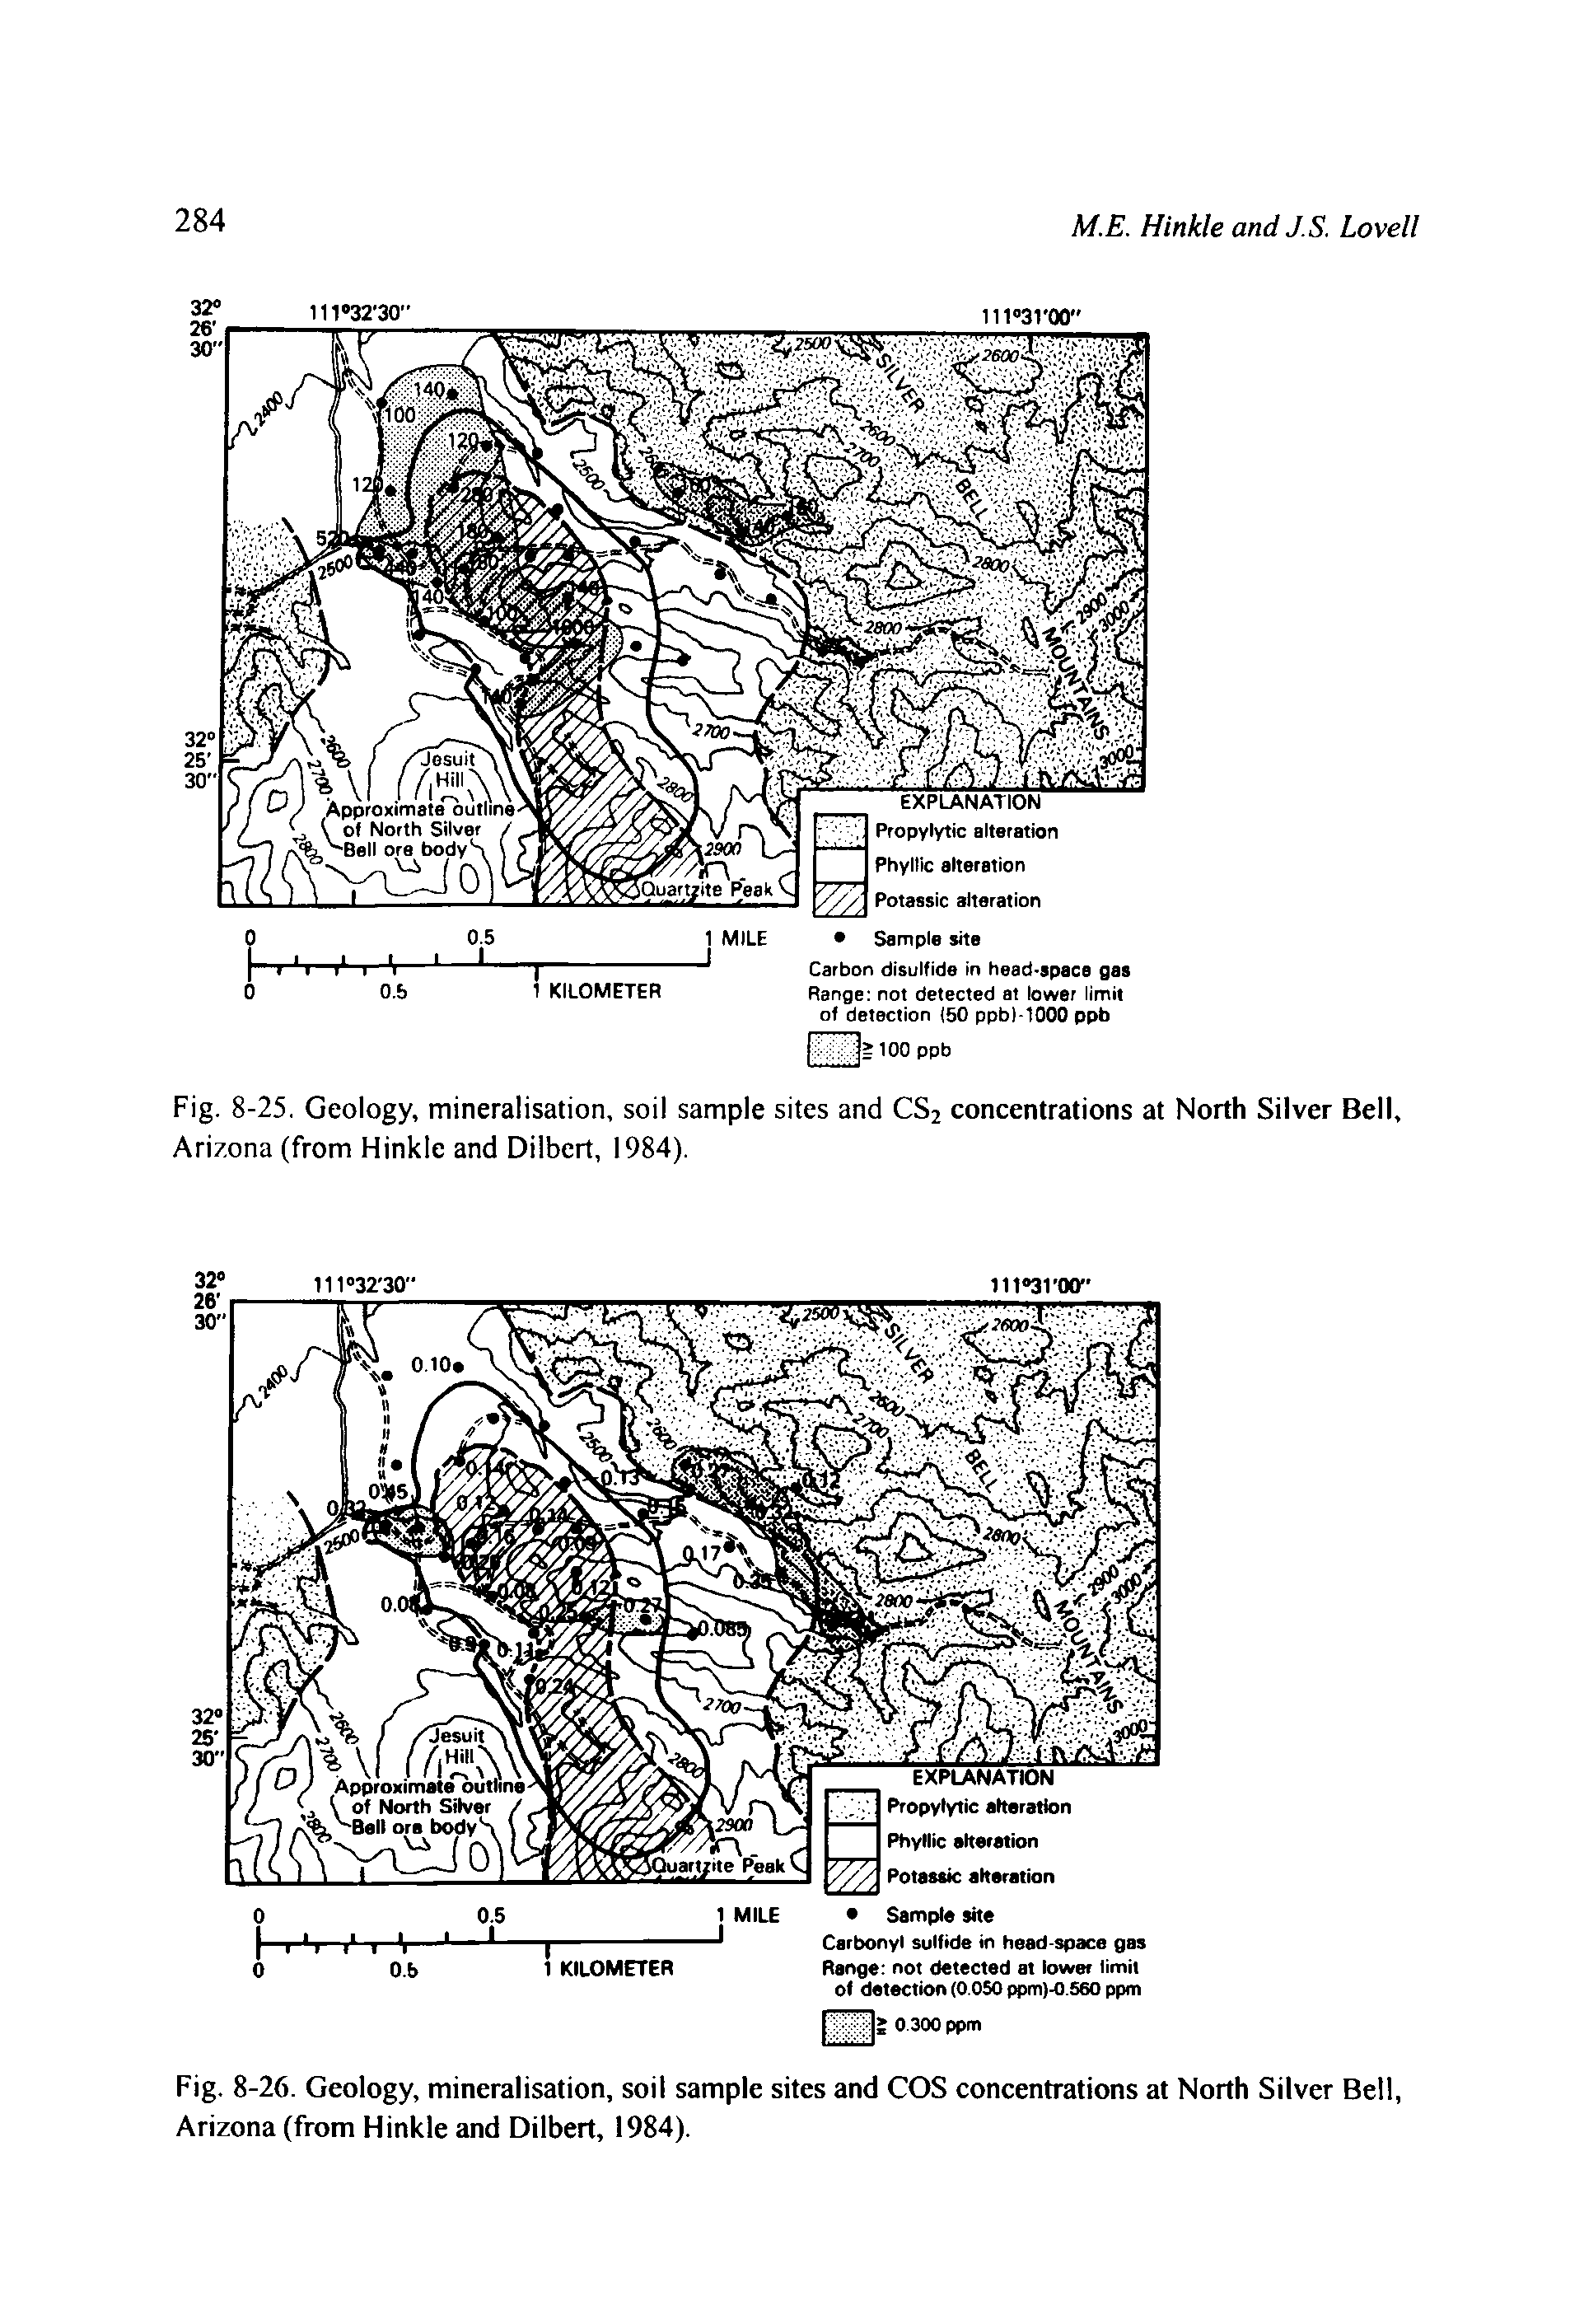 Fig. 8-25. Geology, mineralisation, soil sample sites and CS2 concentrations at North Silver Bell, Arizona (from Hinkle and Dilbert, 1984).